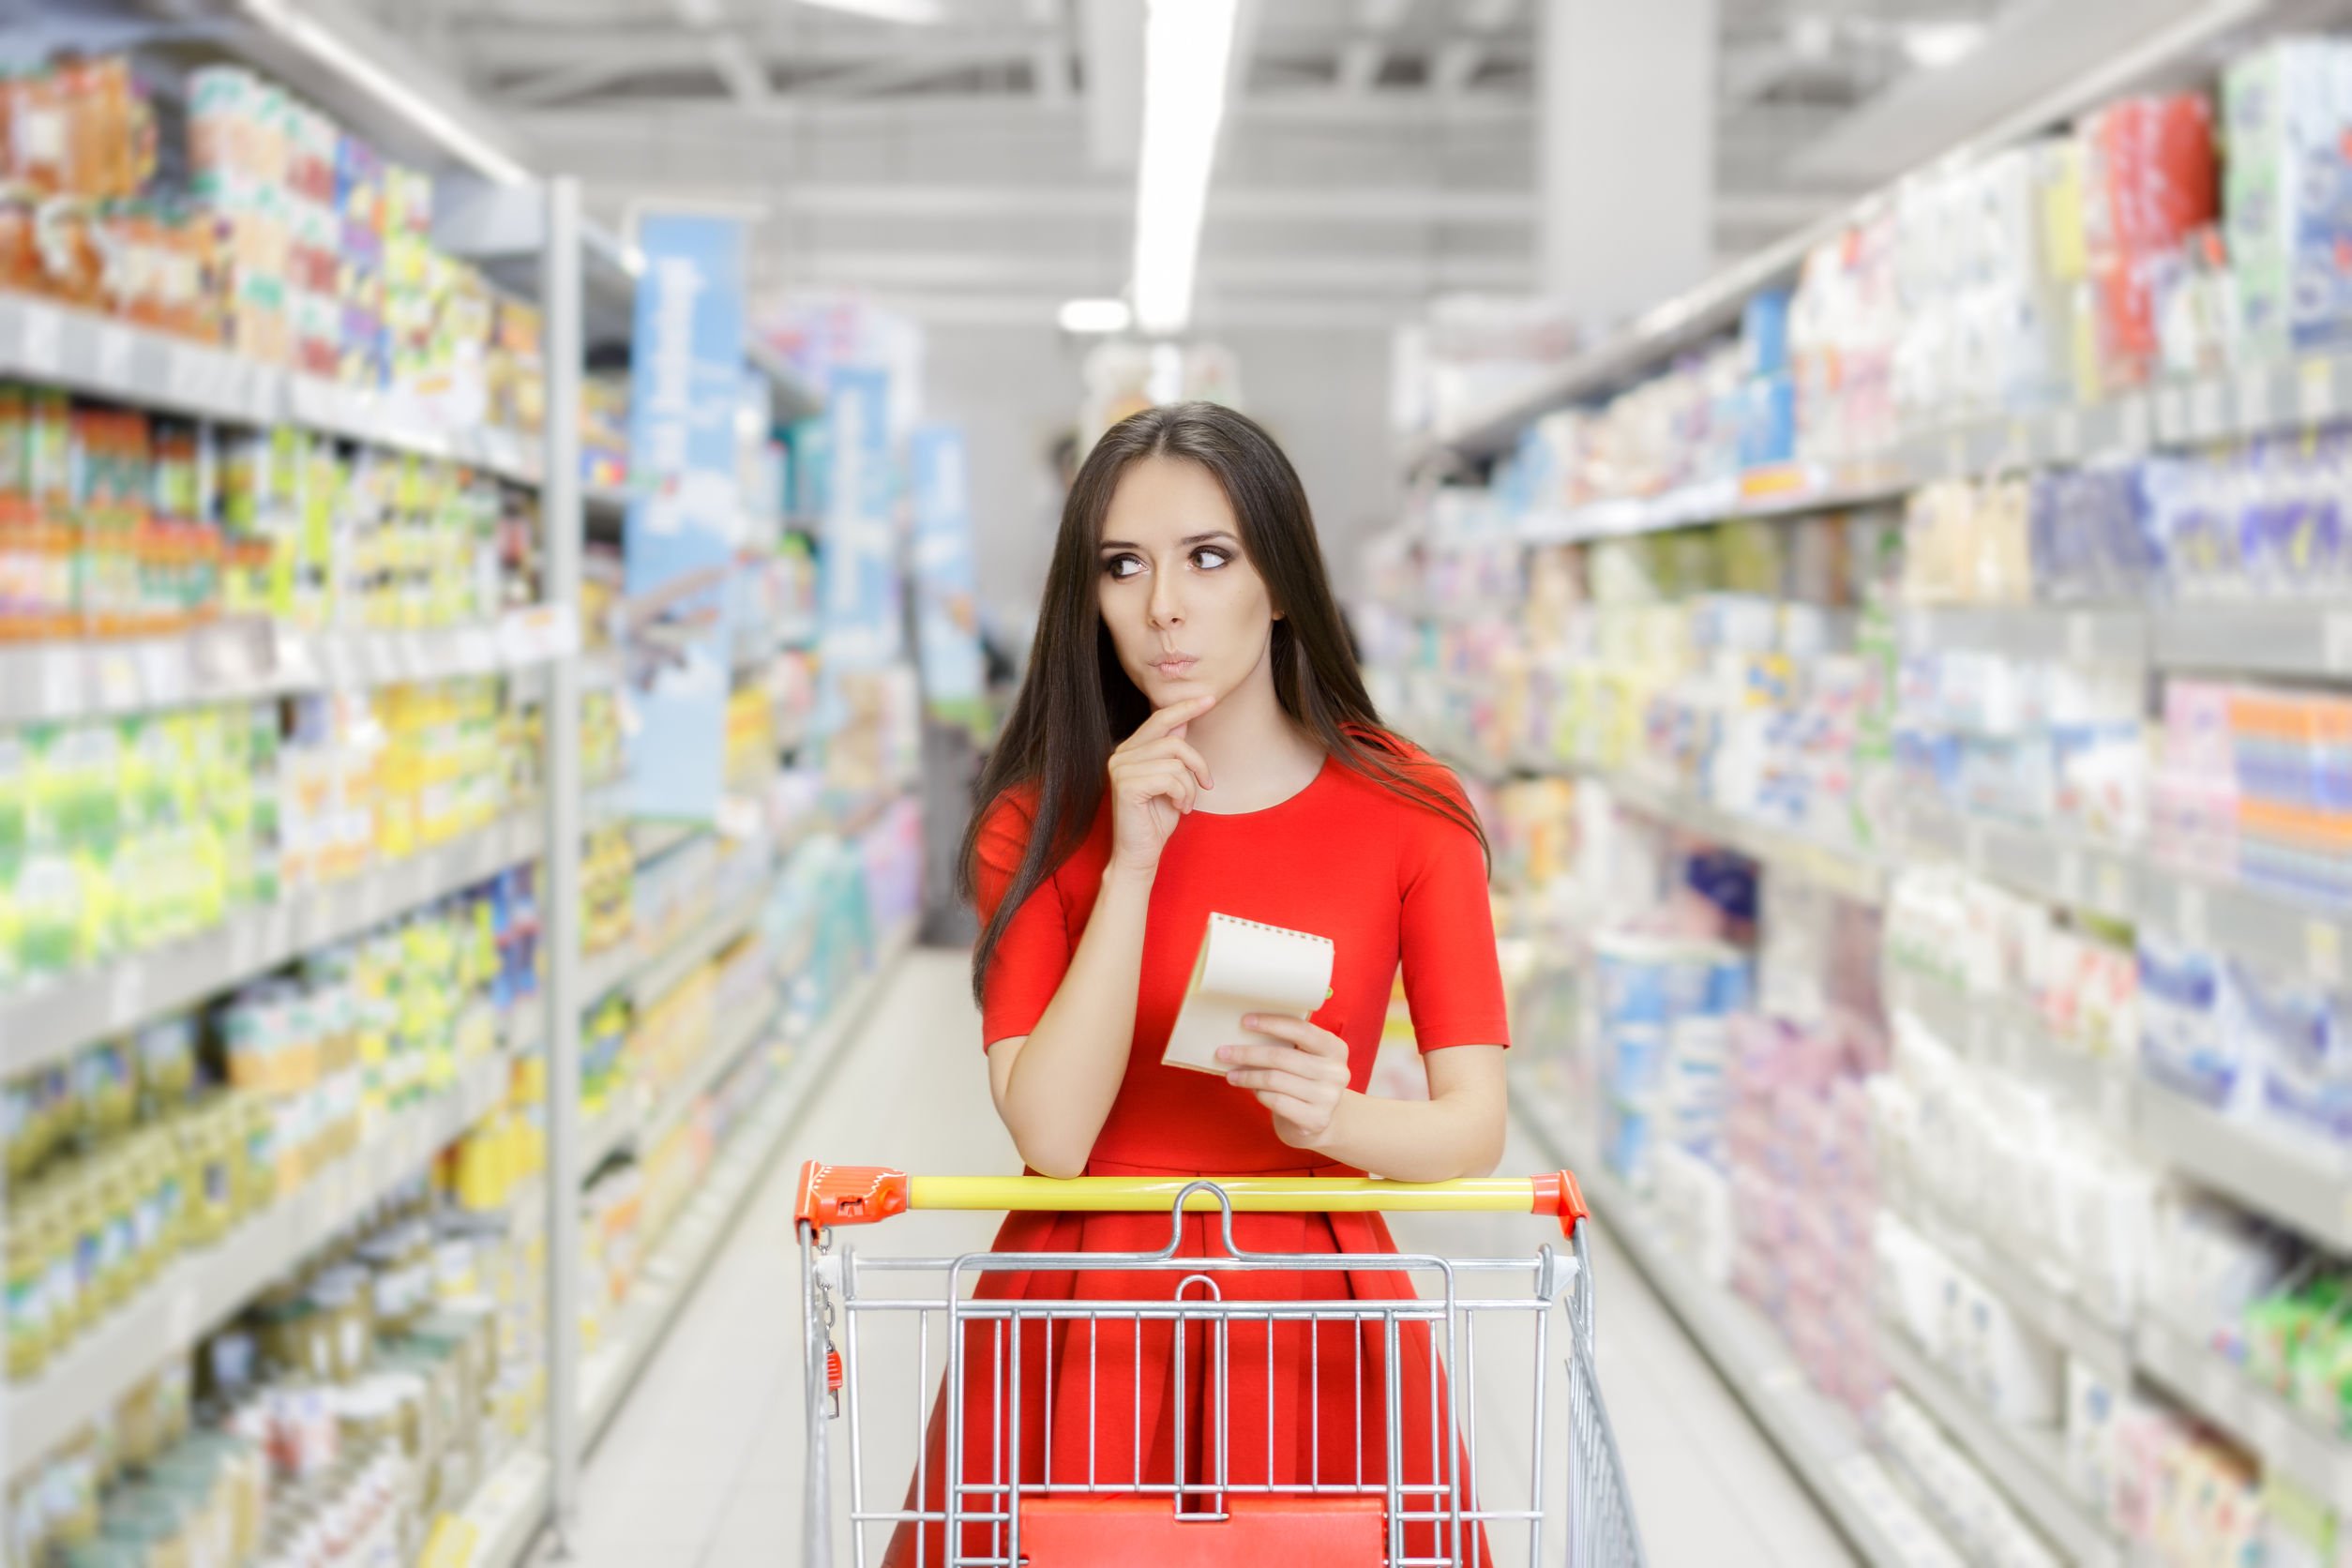 https://blog.unpakt.com/wp-content/uploads/2017/03/40493638_l-Curious-Woman-in-The-Supermarket-with-Shopping-List.jpg